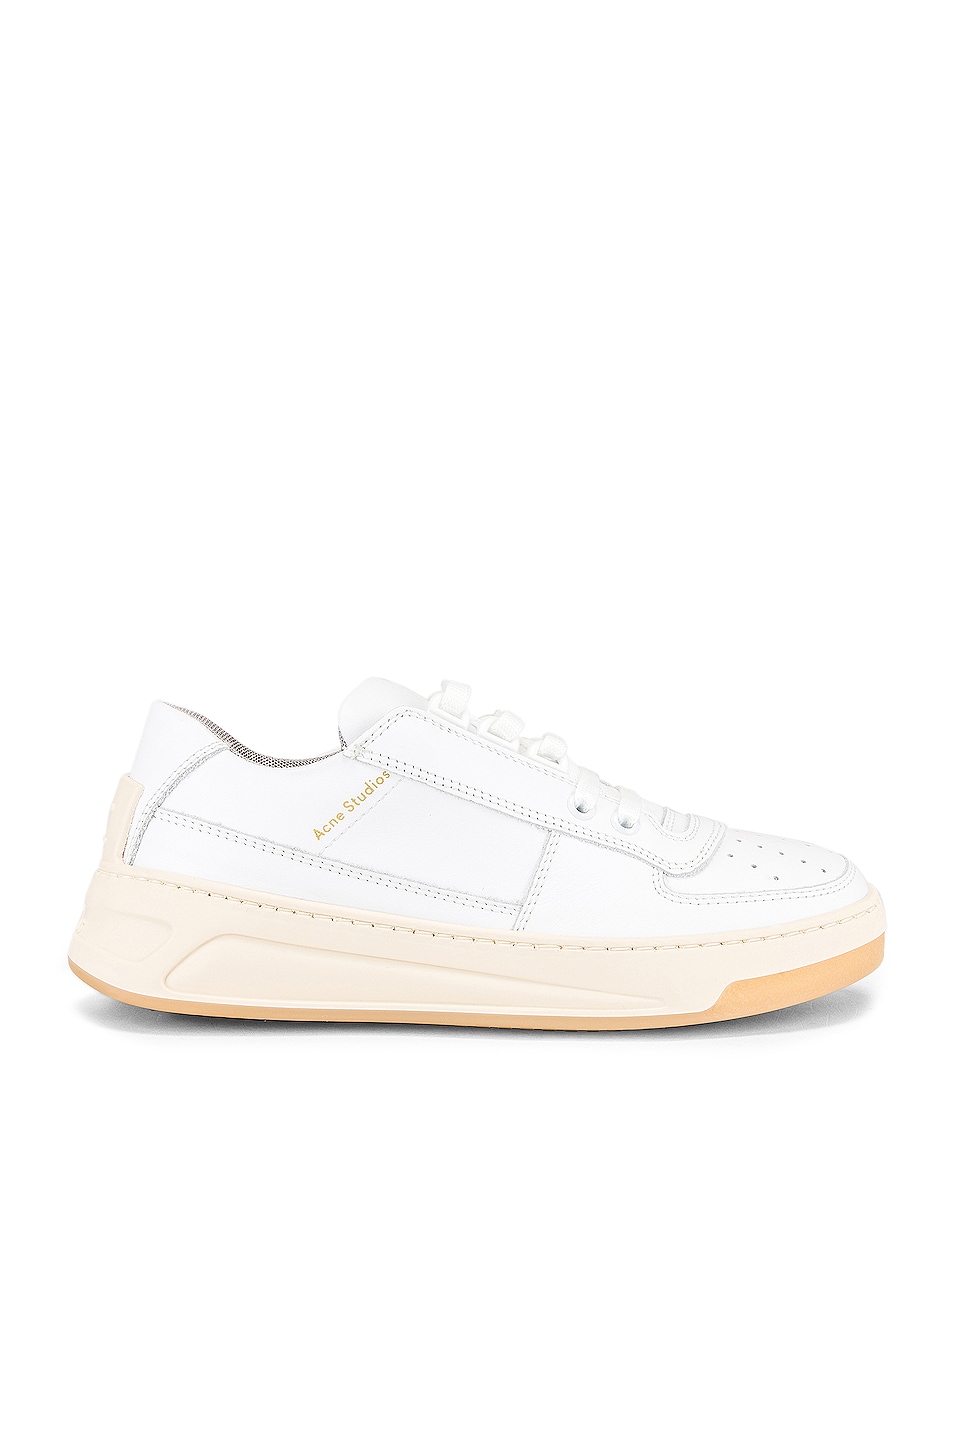 Image 1 of Acne Studios Steffey Lace Up Sneaker in White & White